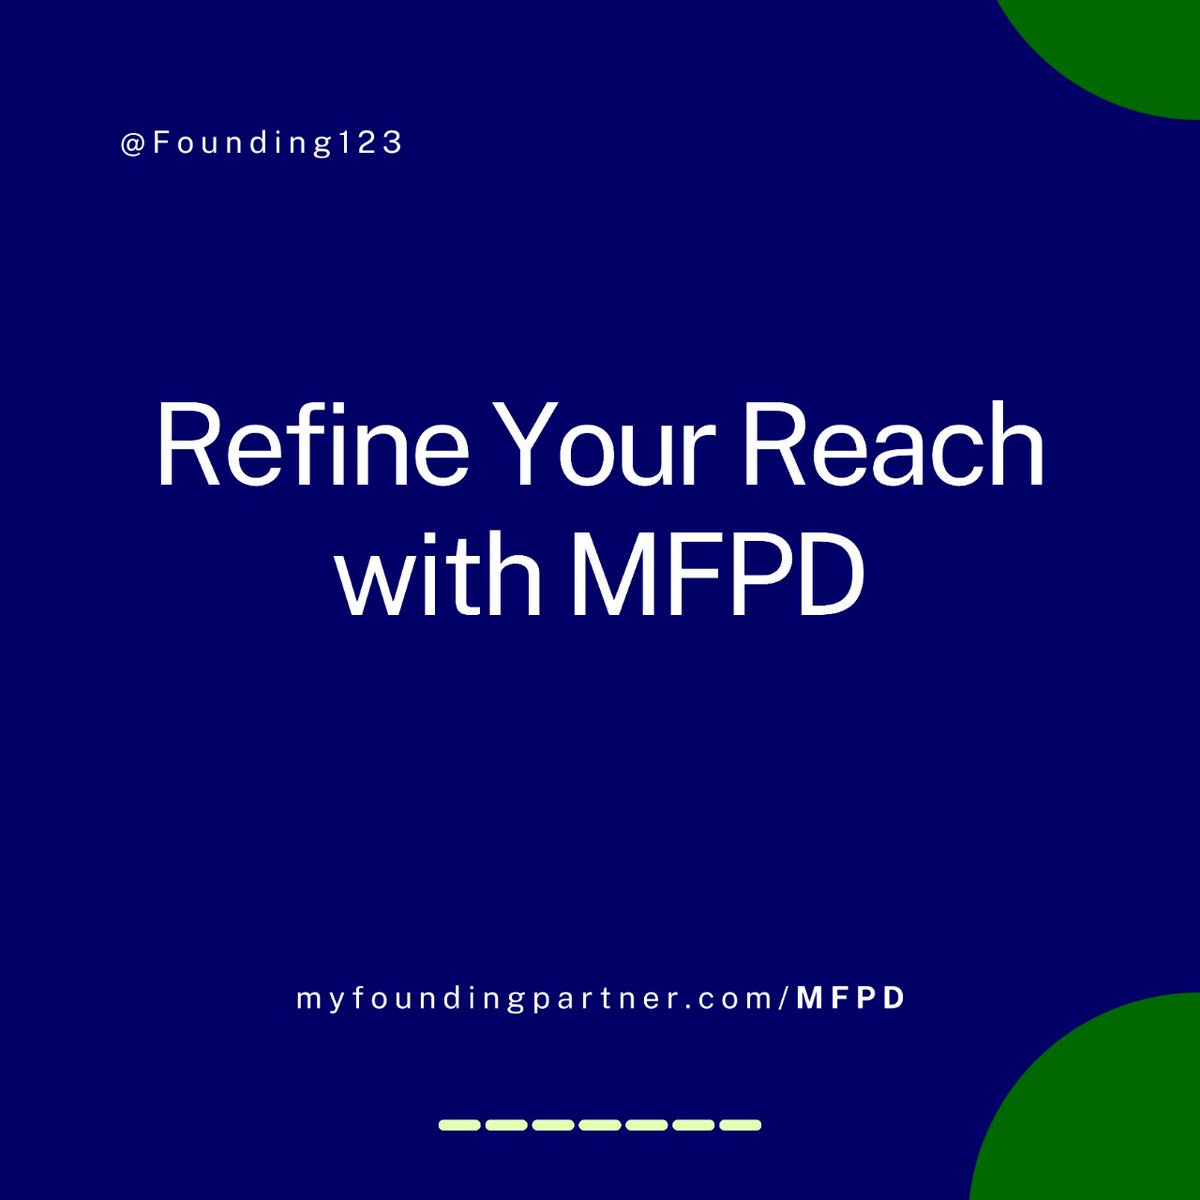 Grow your business with MFPD by knowing your audience.

Define customers, craft personas, and personalize marketing for engagement. 🎯

#TargetMarket #MarketingStrategy #MFPDTools #MFP #BeAFounder